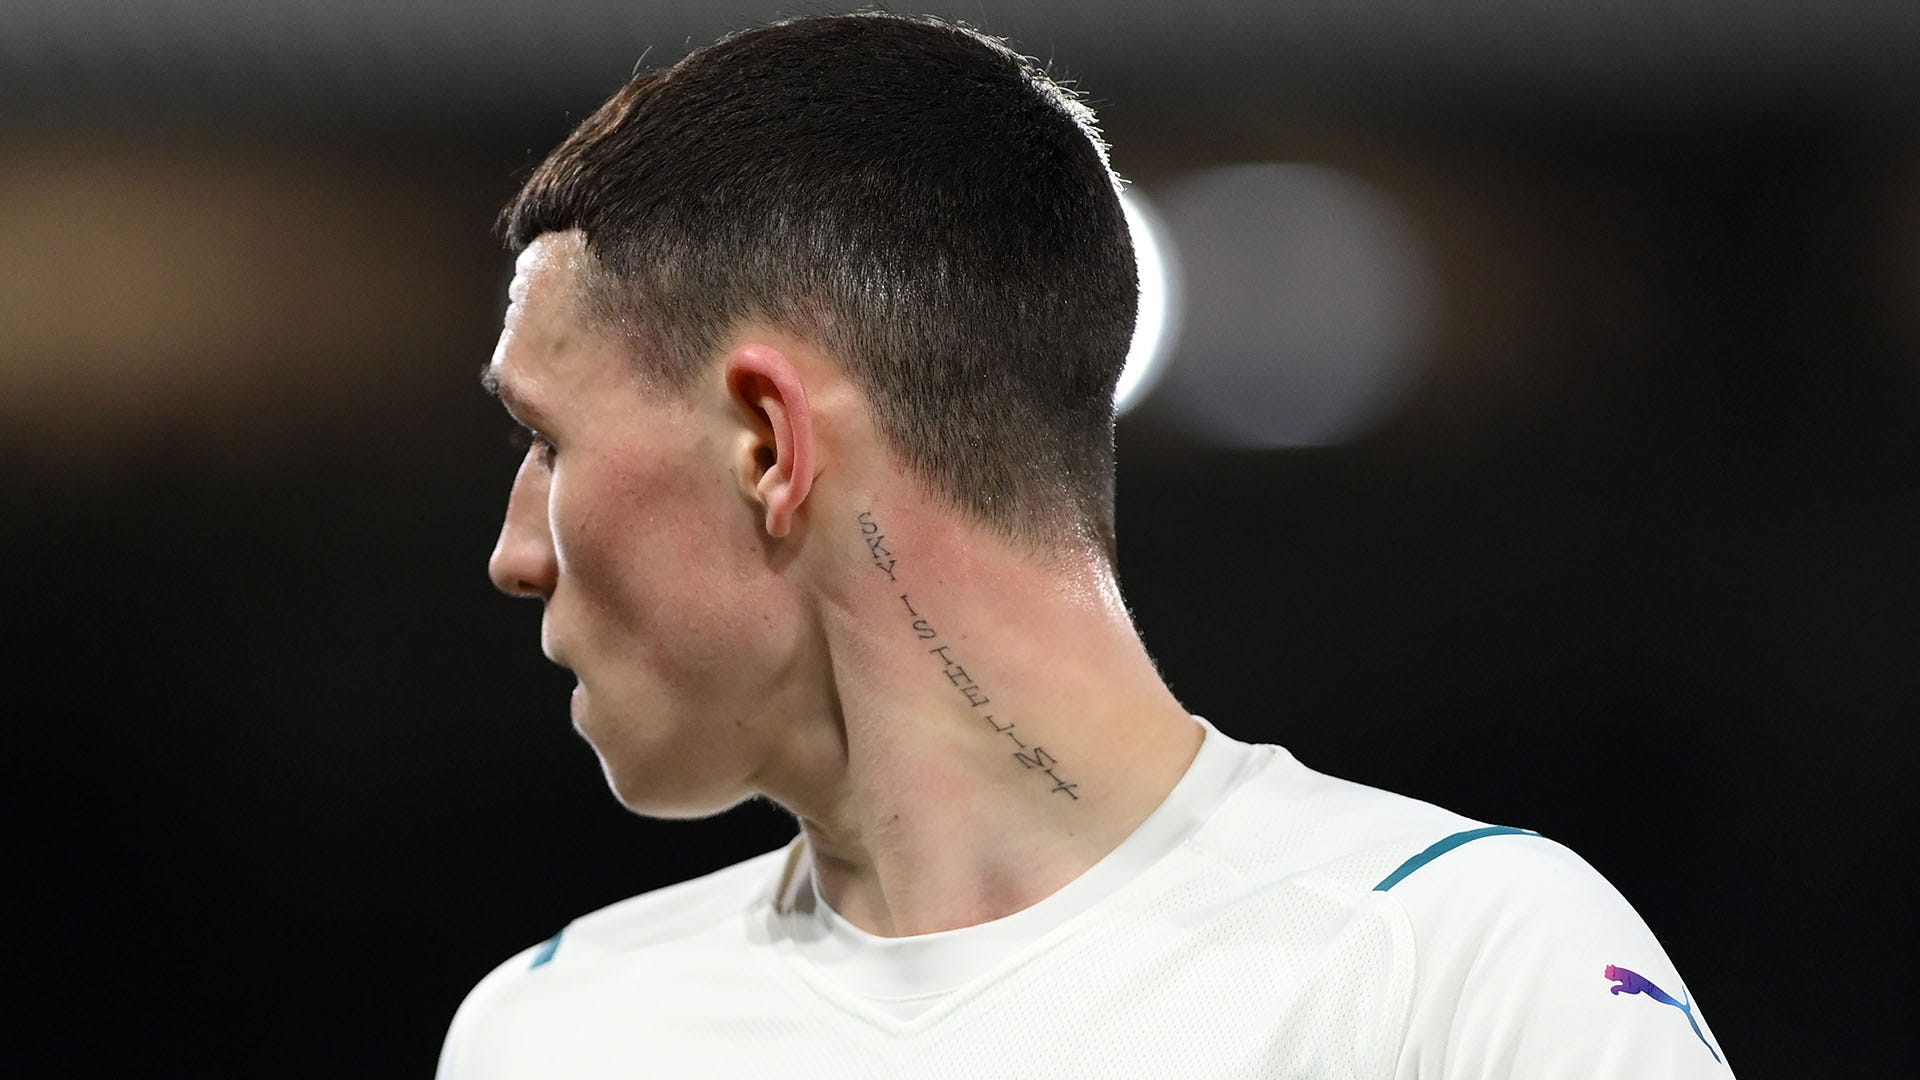 Phil Foden Manchester City 2021-22